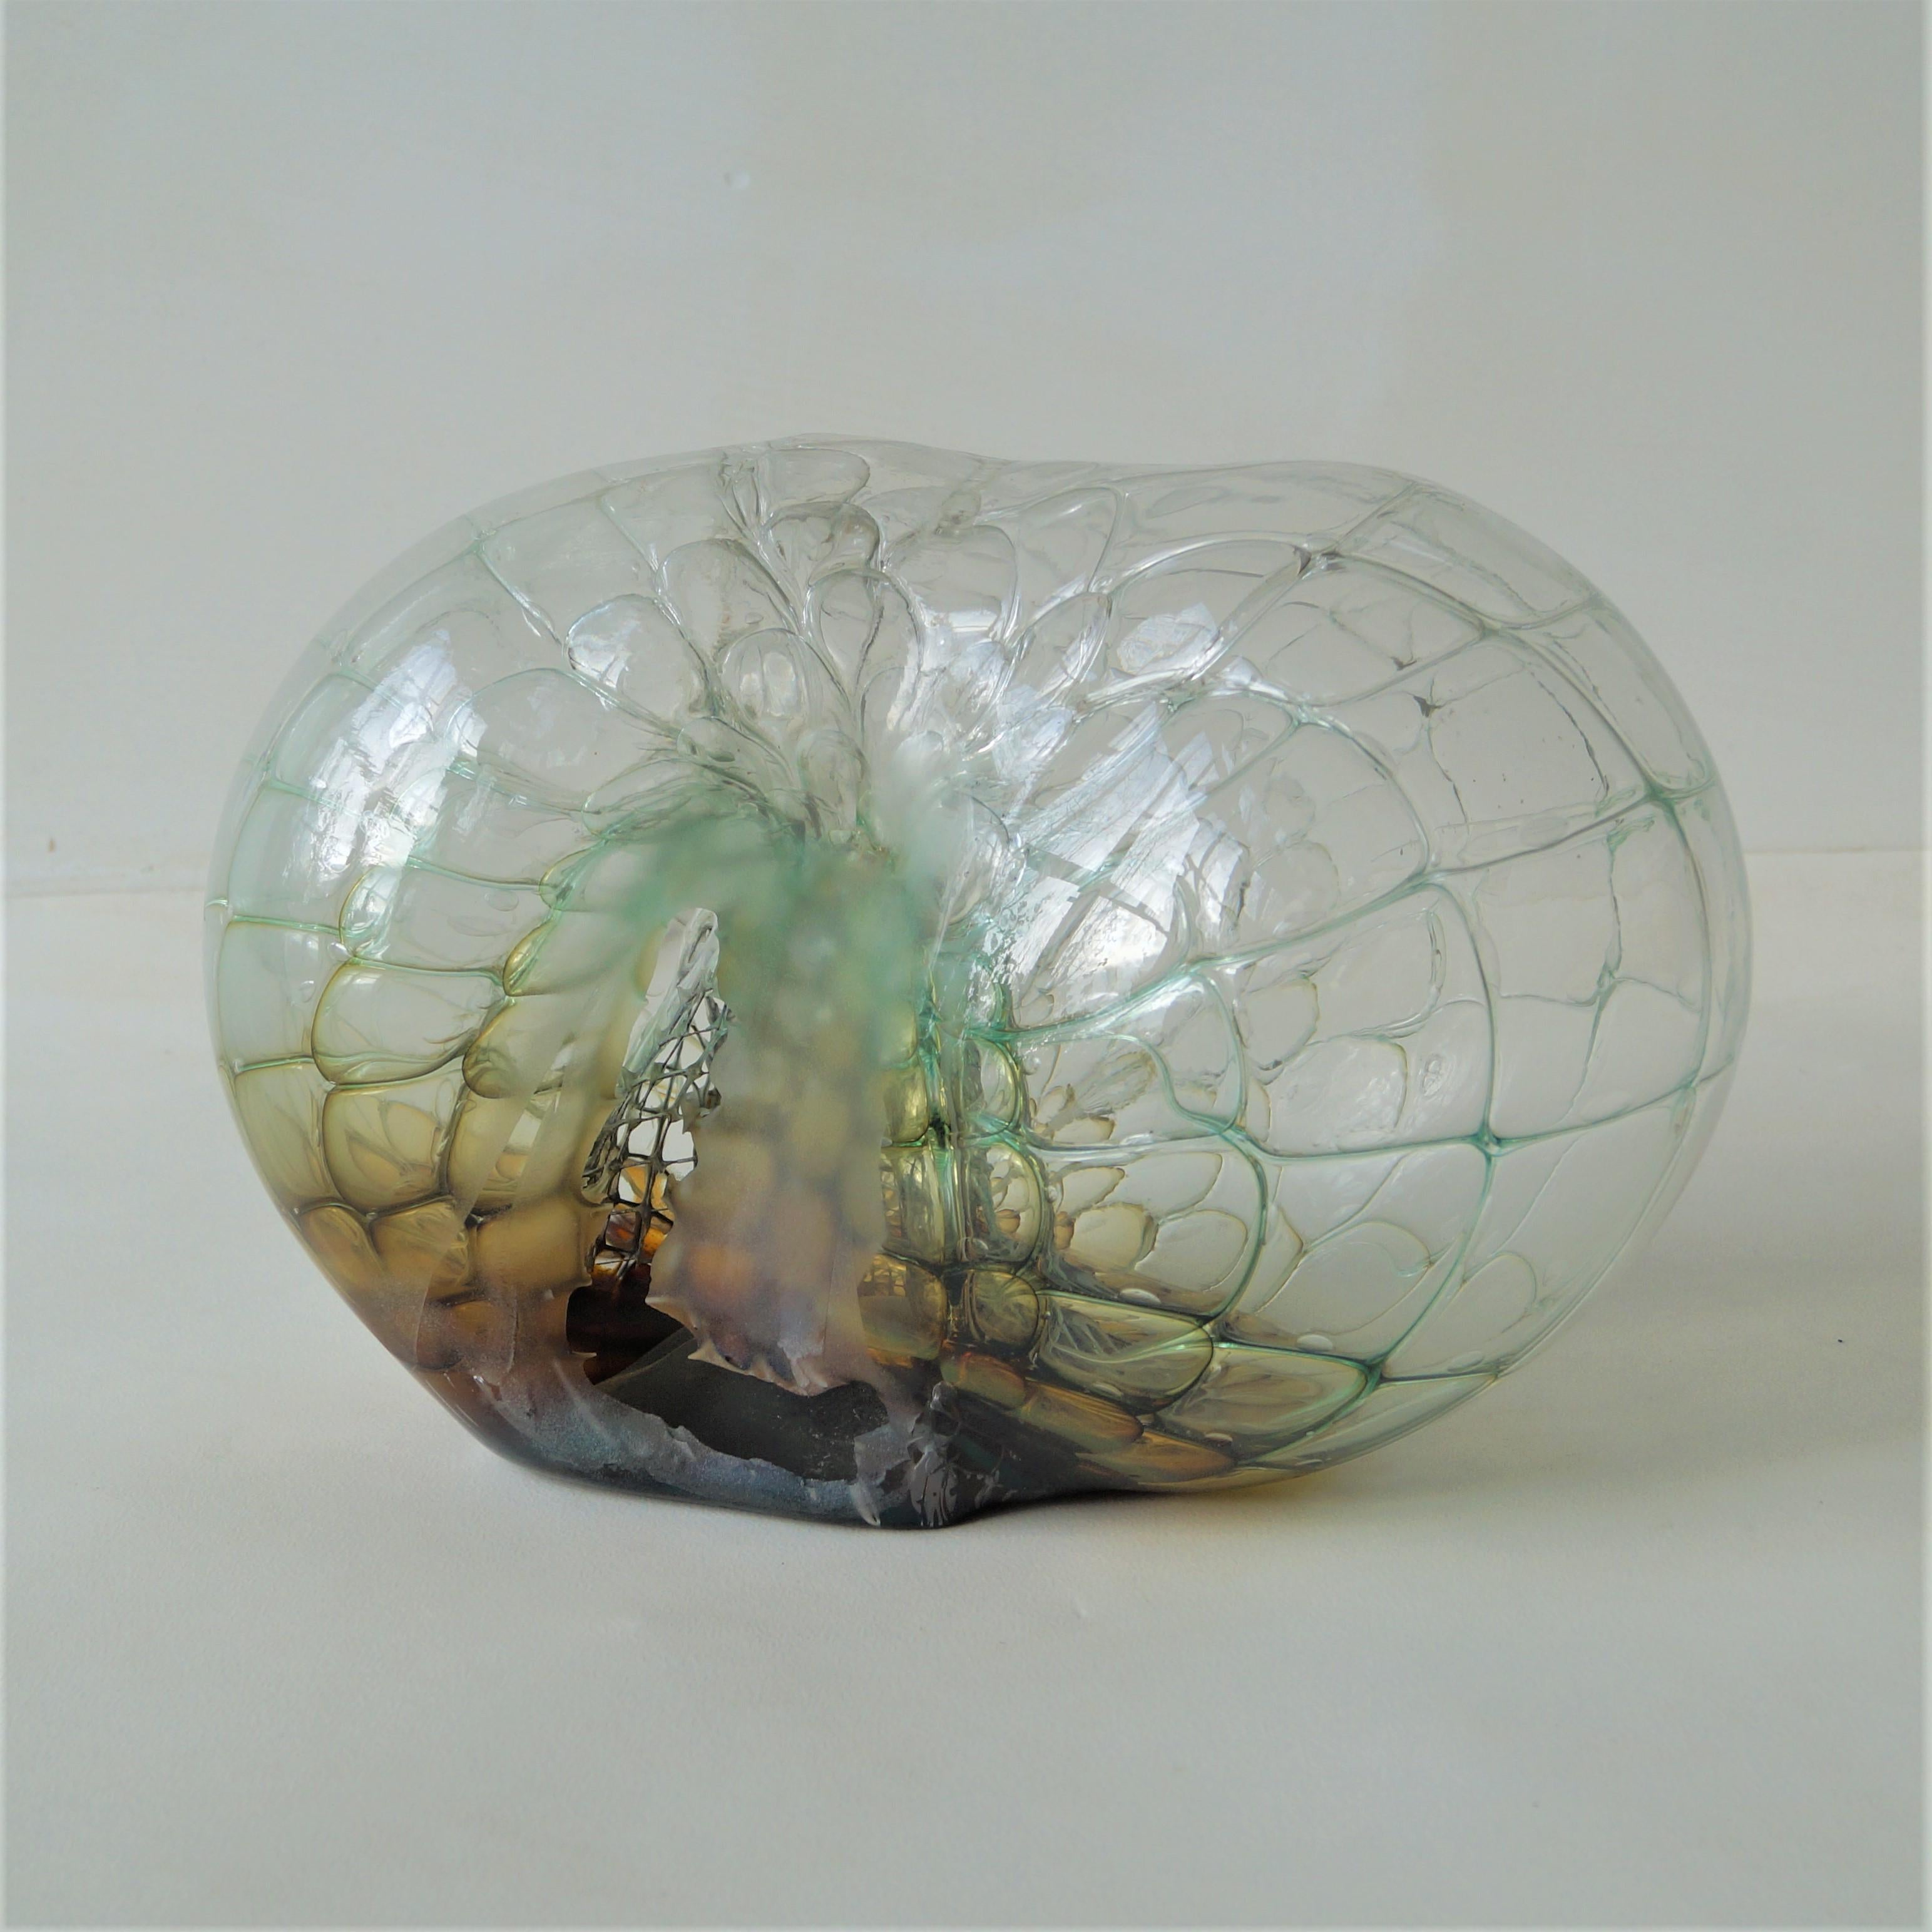 A impressively large clear glass sculpture with a green/yellow/cognac glass core, clear glass overlay and metal mesh (honeycomb) inside. Creator is Jorg F. Zimmerman, estimated ca. 2000. 

The piece is large and would look wonderful as a